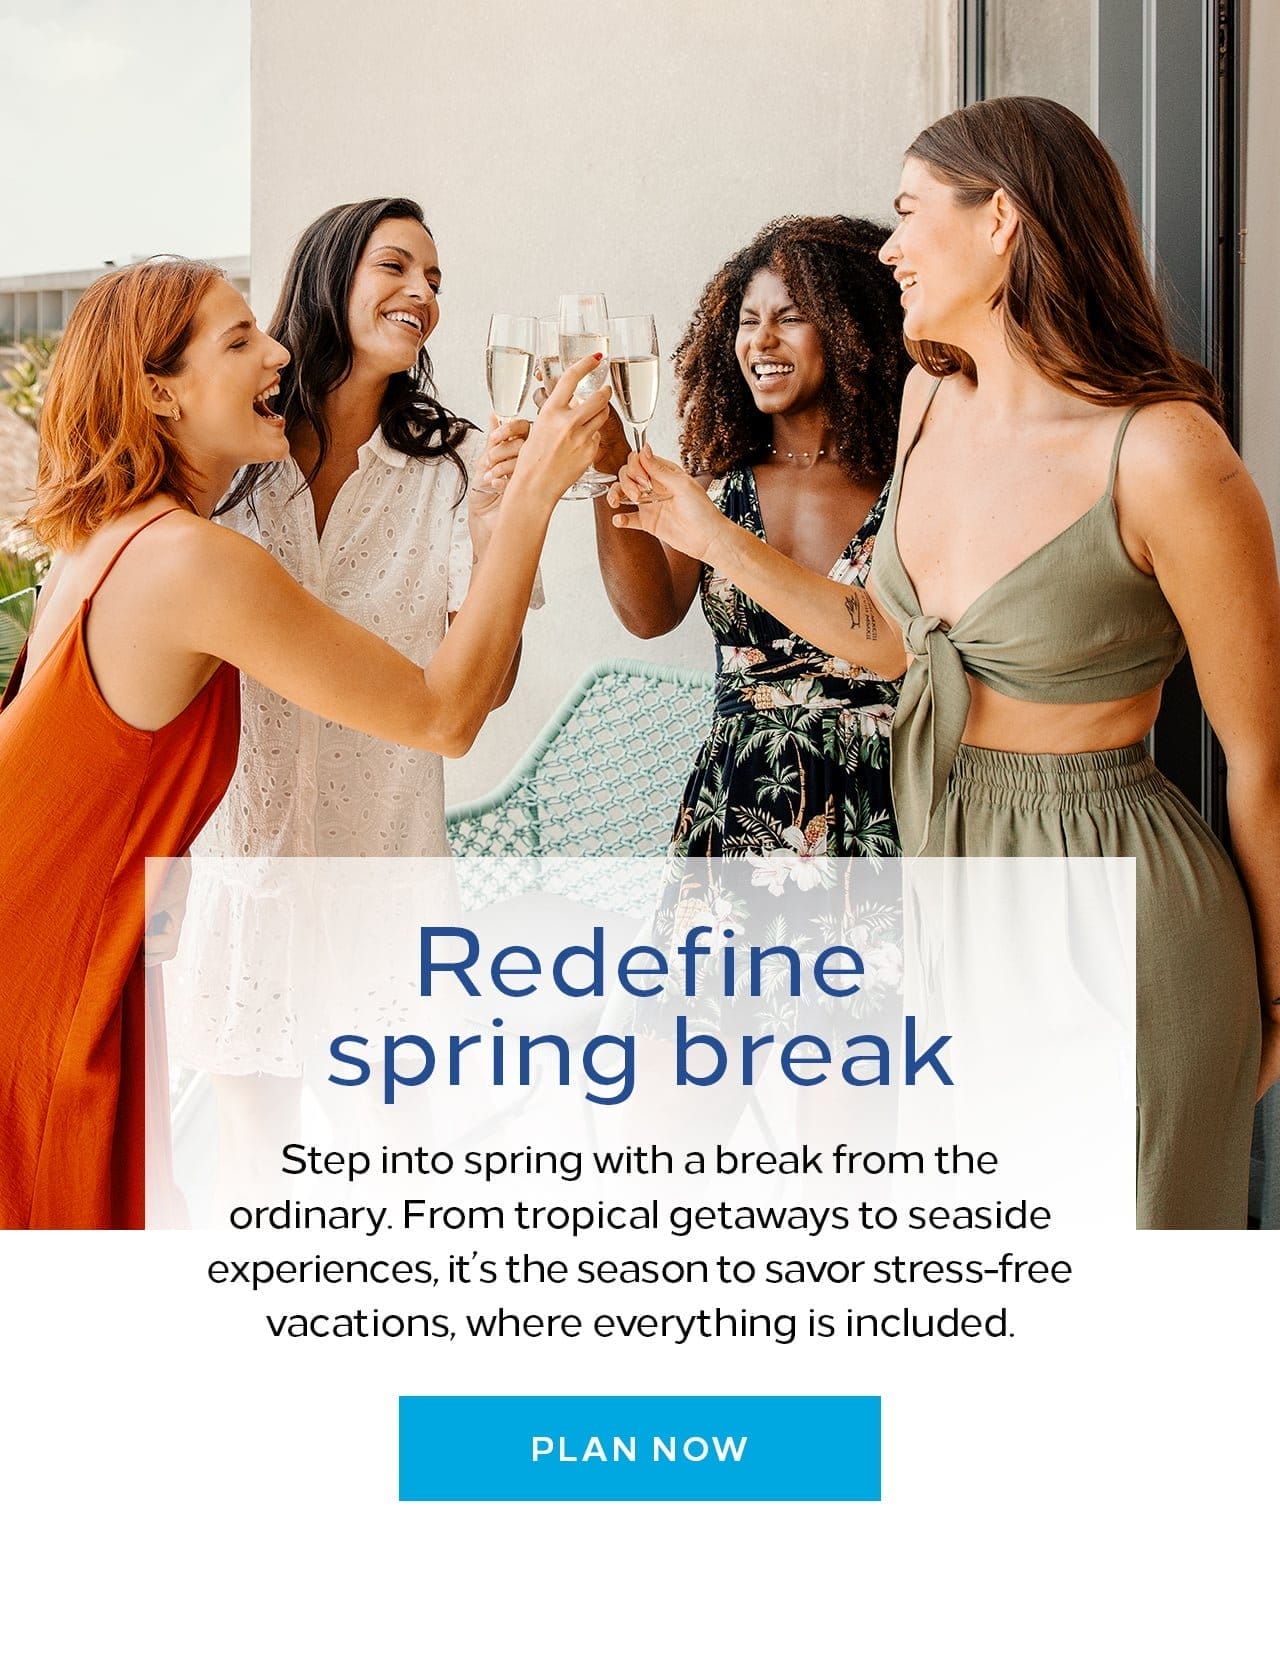  Redefine spring break. Step into spring with a break from the ordinary. From tropical getaways to seaside experiences, it’s the season to savor stress-free vacations, where everything is included. Plan now. Link to Hilton website. 